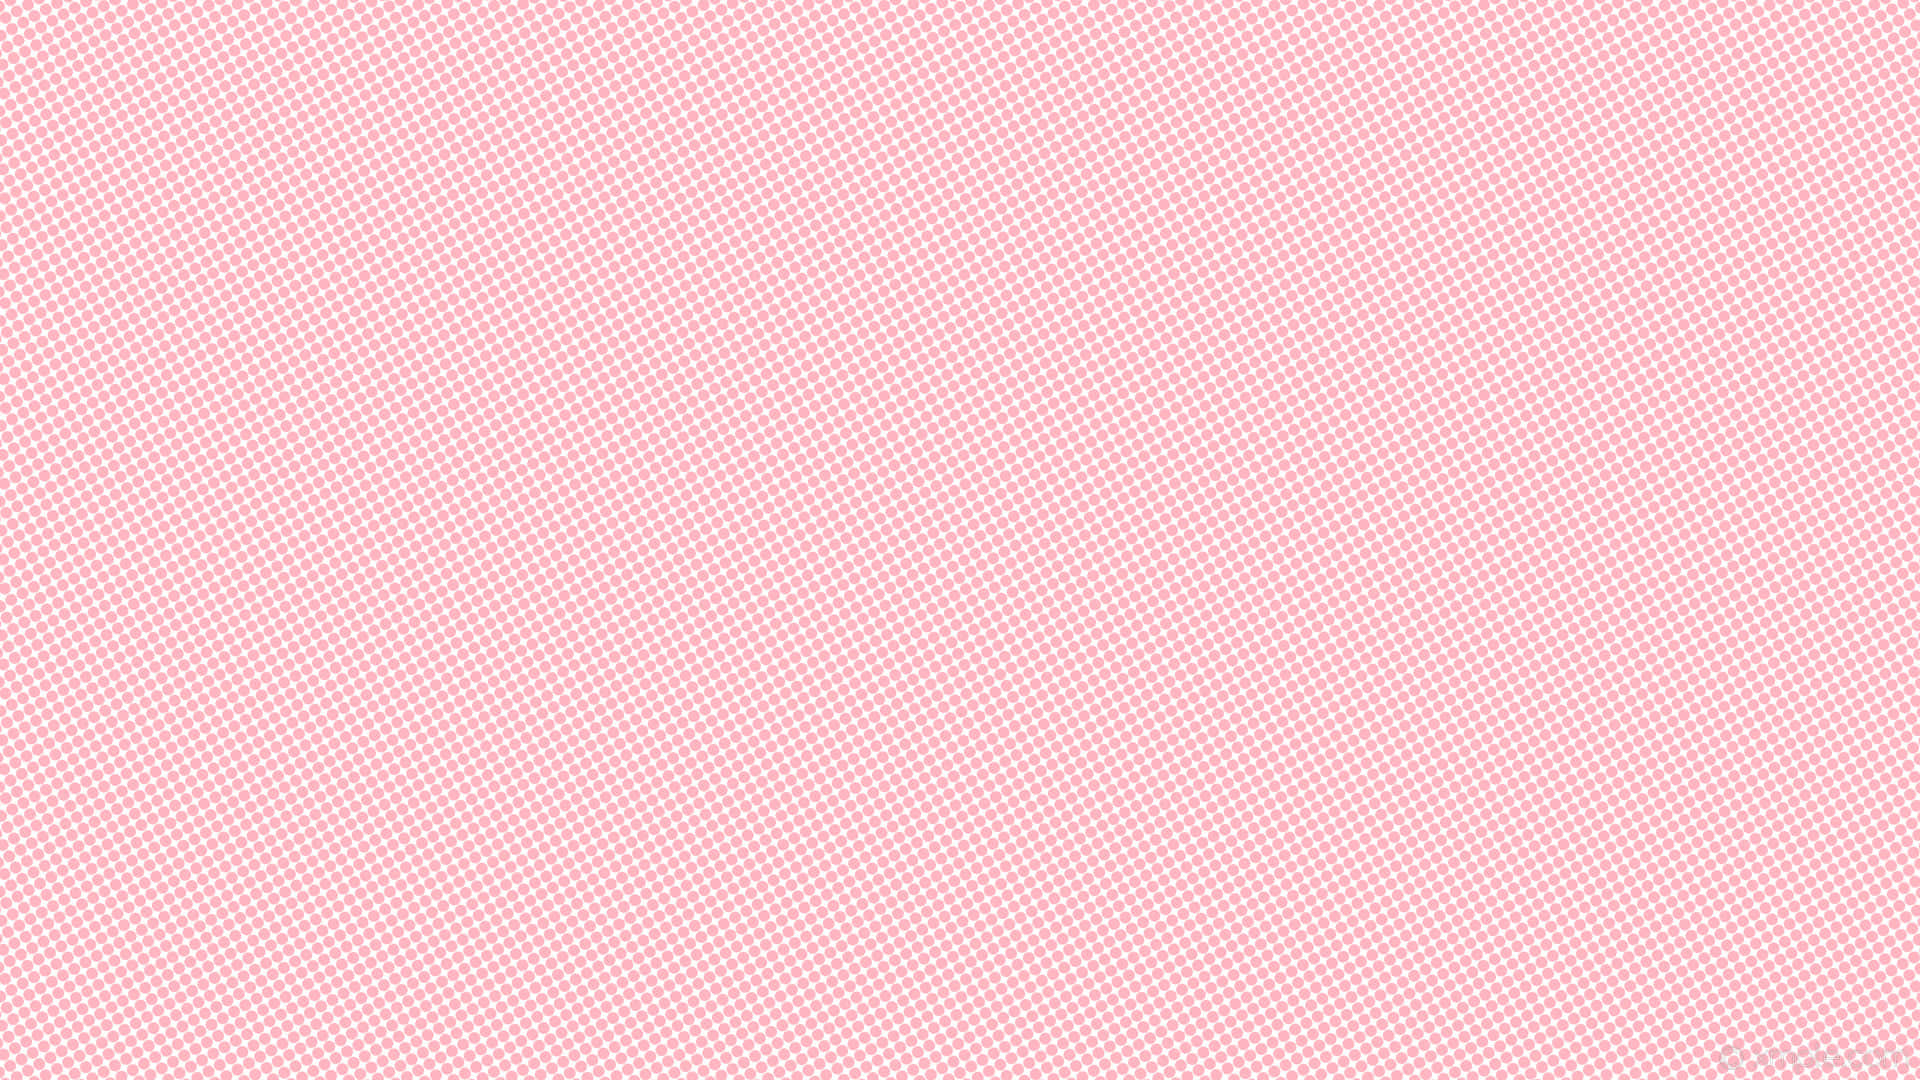 100+] Solid Pink Backgrounds